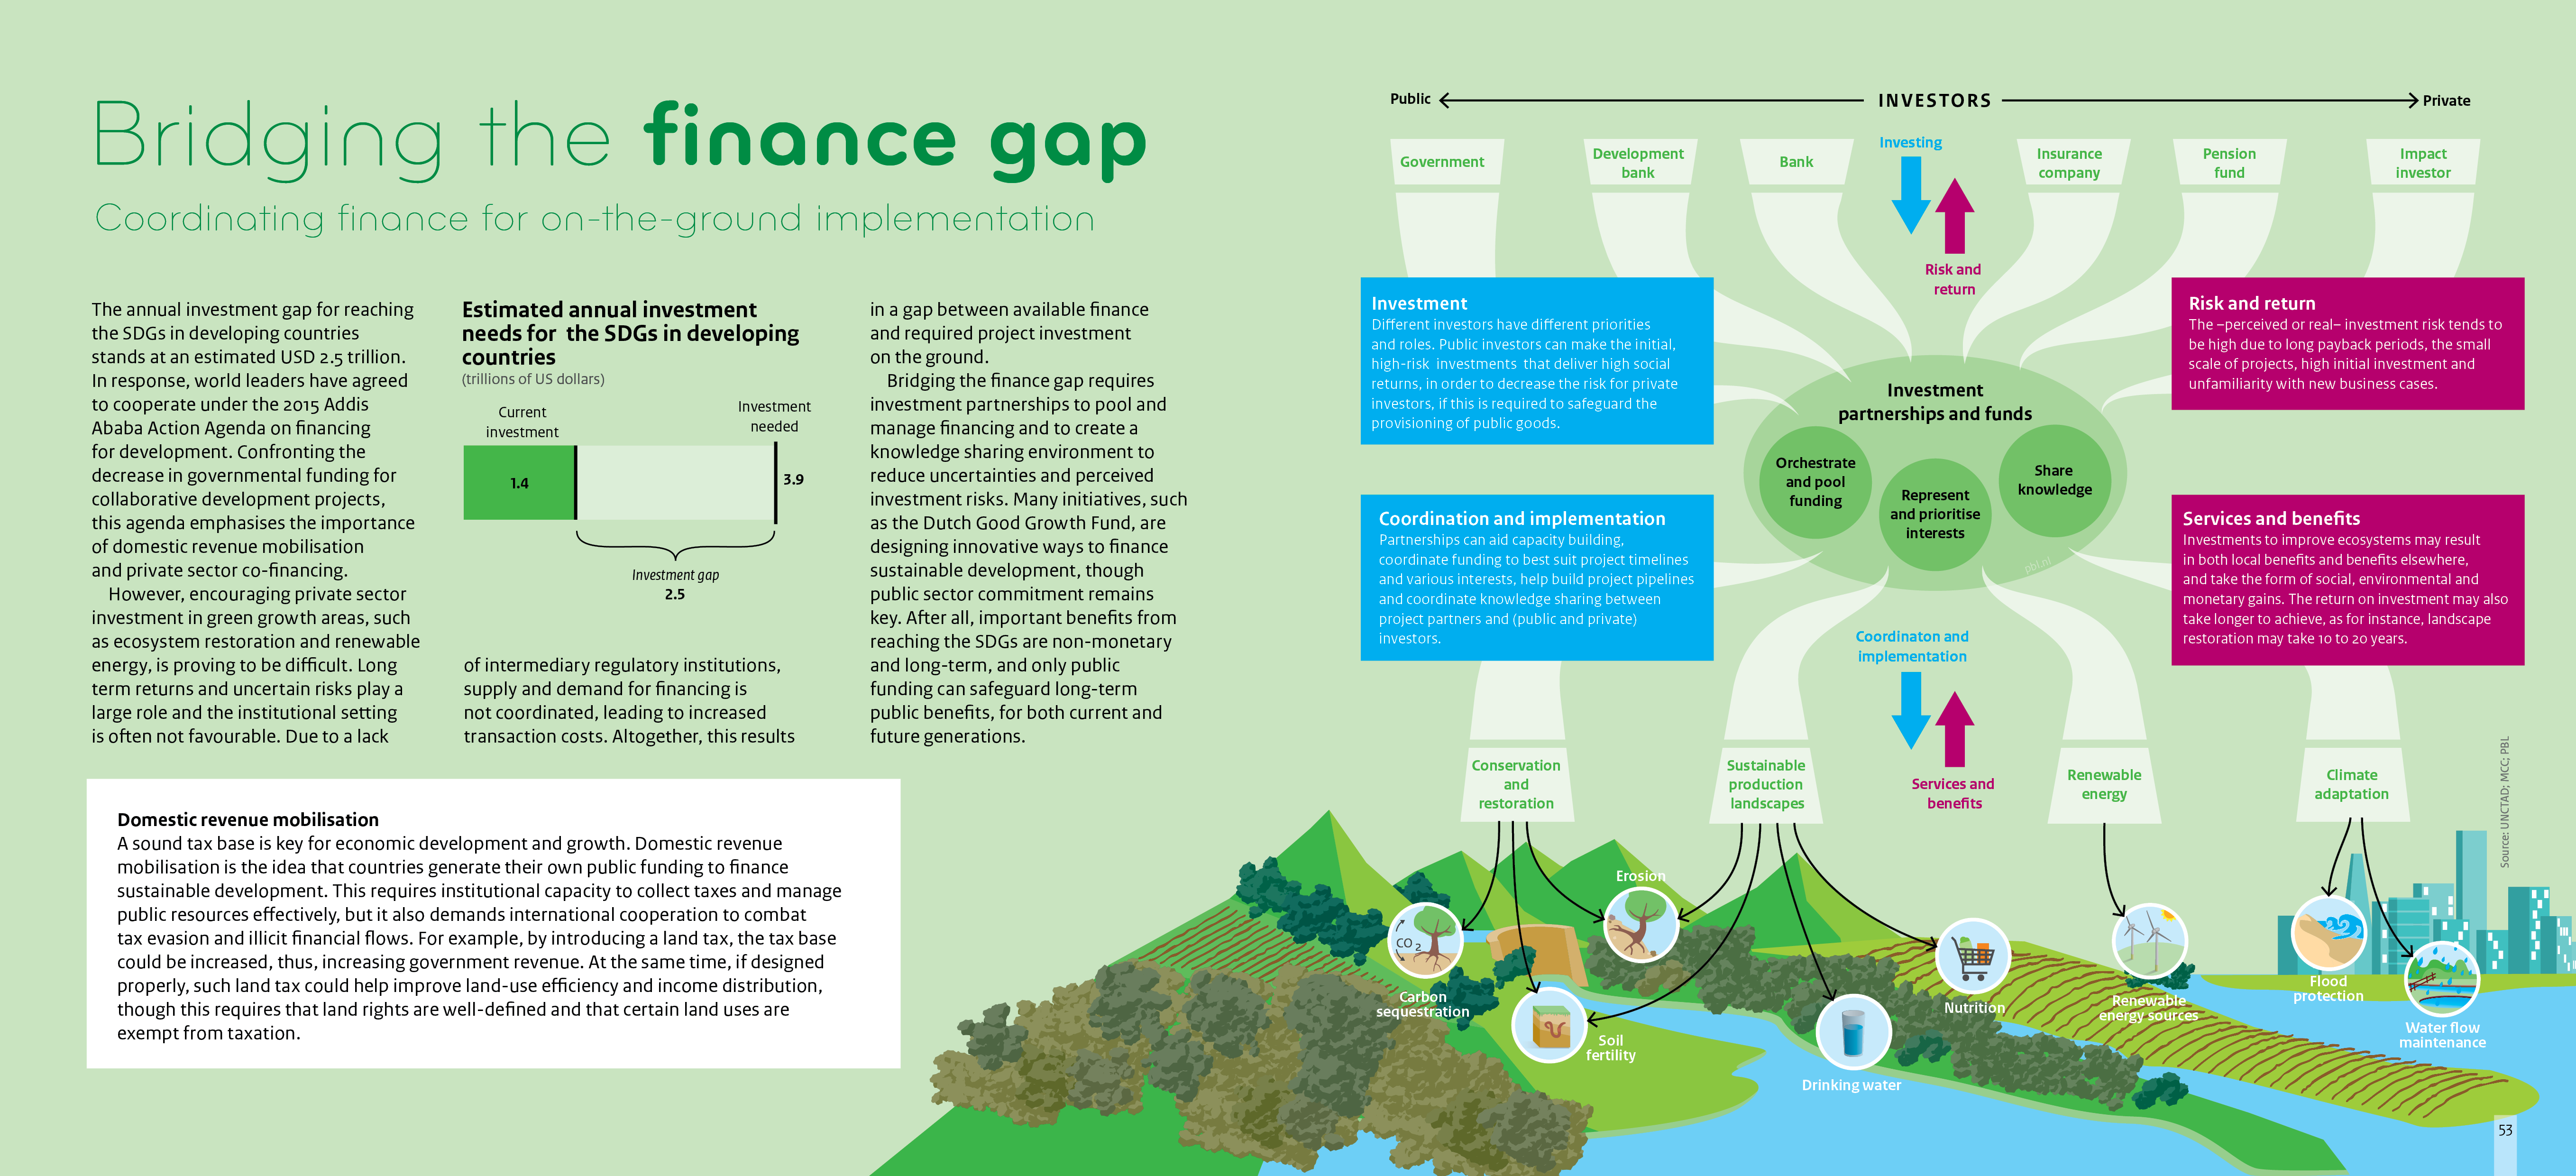 The finance gap exists in multiple sectors. To bridge the gap, investment partnerships and funds are required to link multiple investors with projects on the ground through orchestrating and pooling finance, representing and prioritising interests, and sharing knowledge.